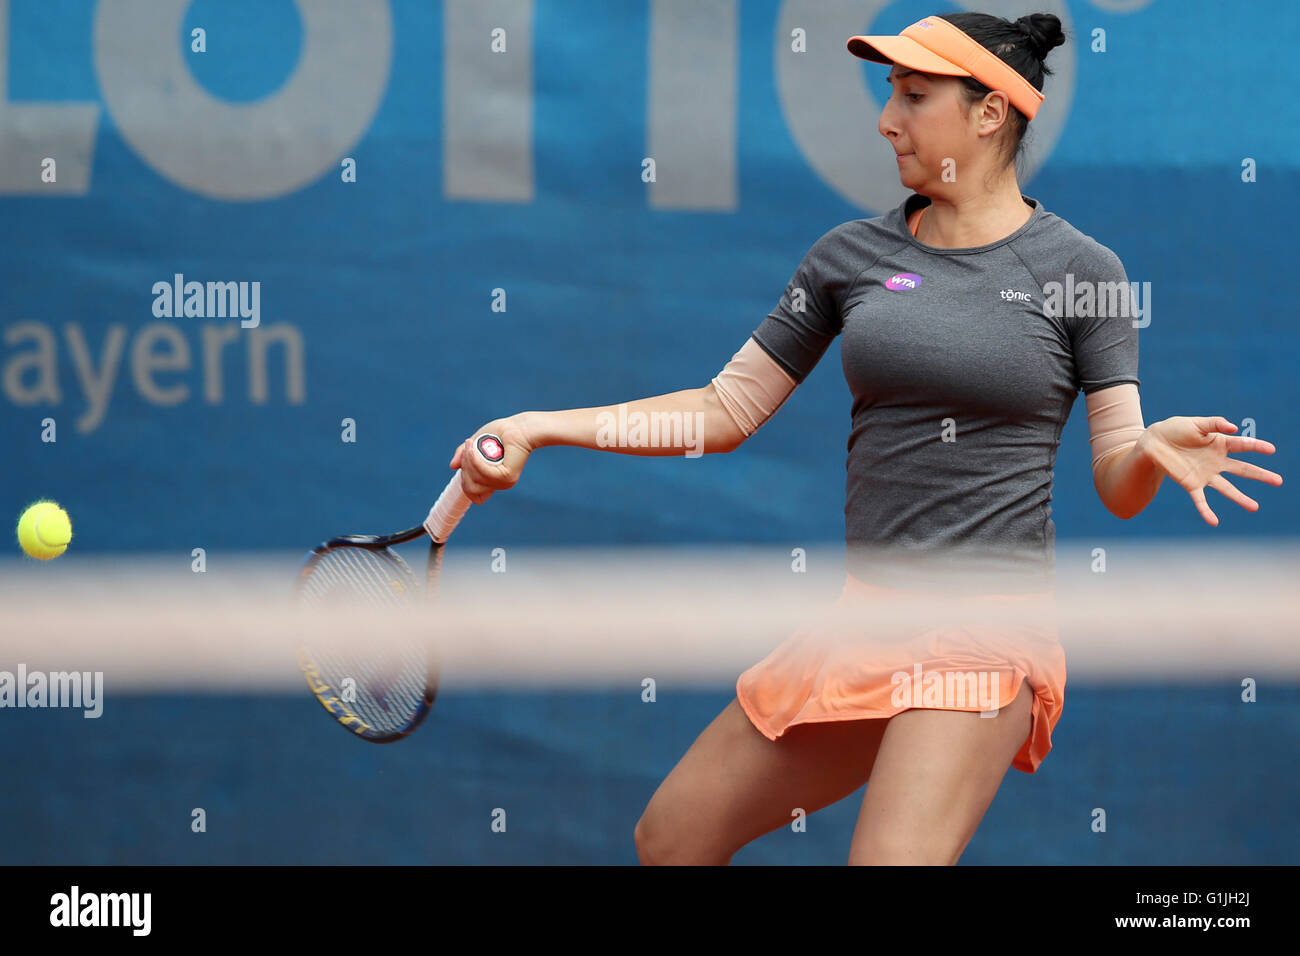 Nuremberg, Germany. 17th May, 2016. Romania's Cristina Dinu in action  against Germany's Julia Goerges during their first round match of the WTA  tennis tournament in Nuremberg, Germany, 17 May 2016. Photo: DANIEL